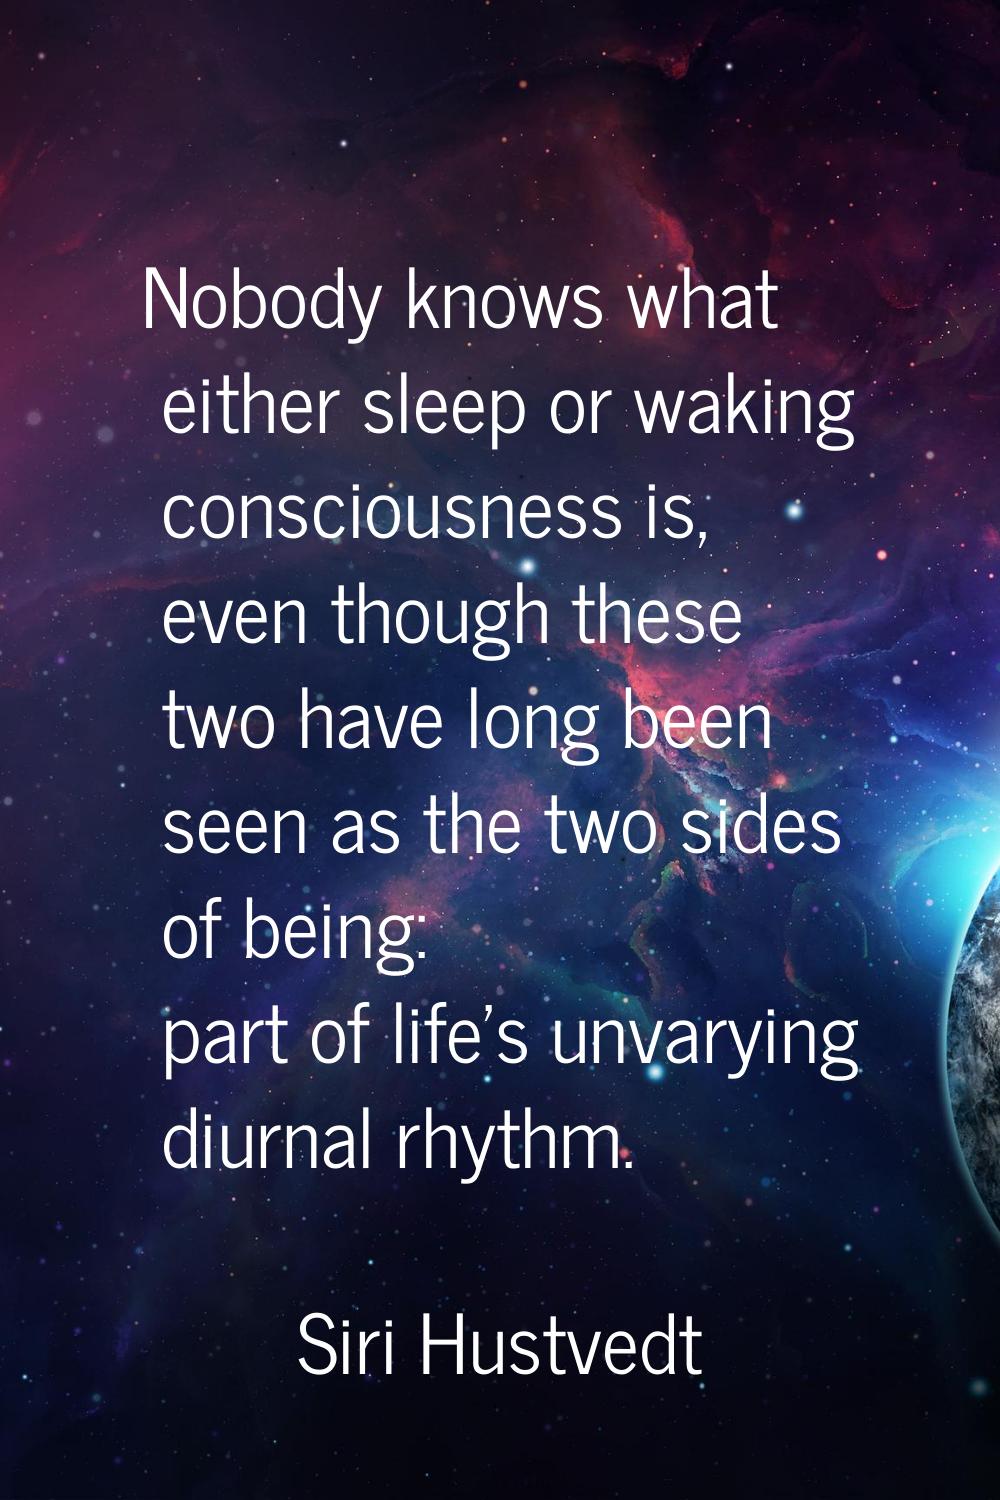 Nobody knows what either sleep or waking consciousness is, even though these two have long been see